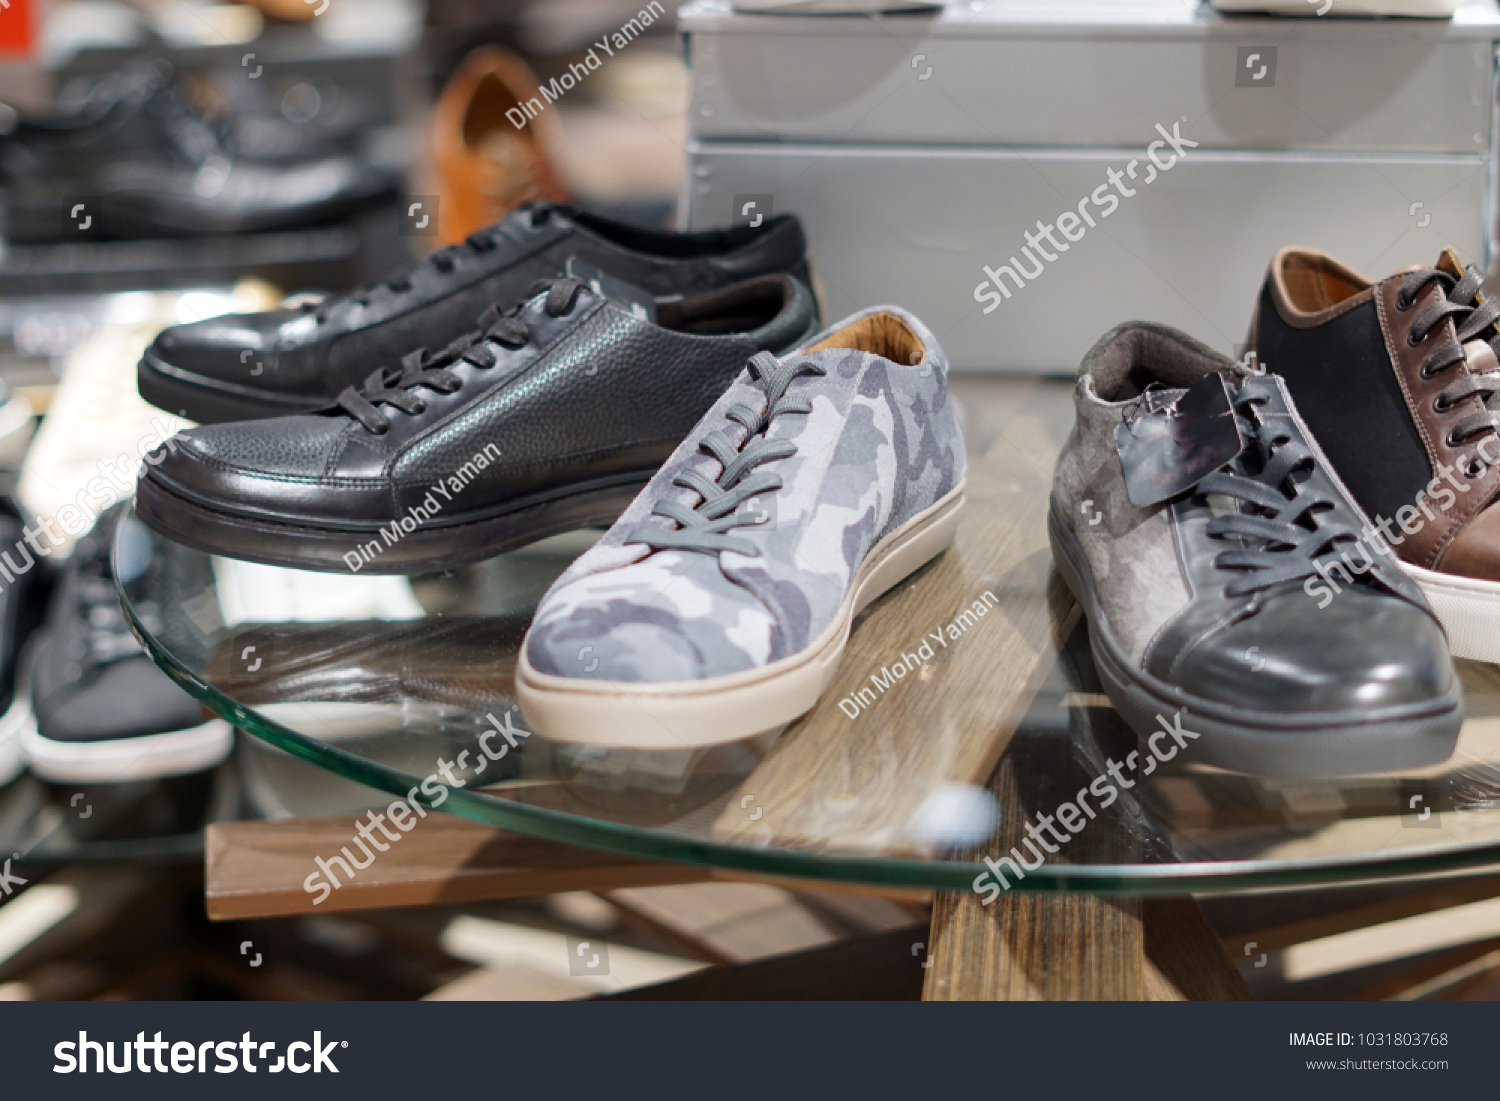 shoes on display